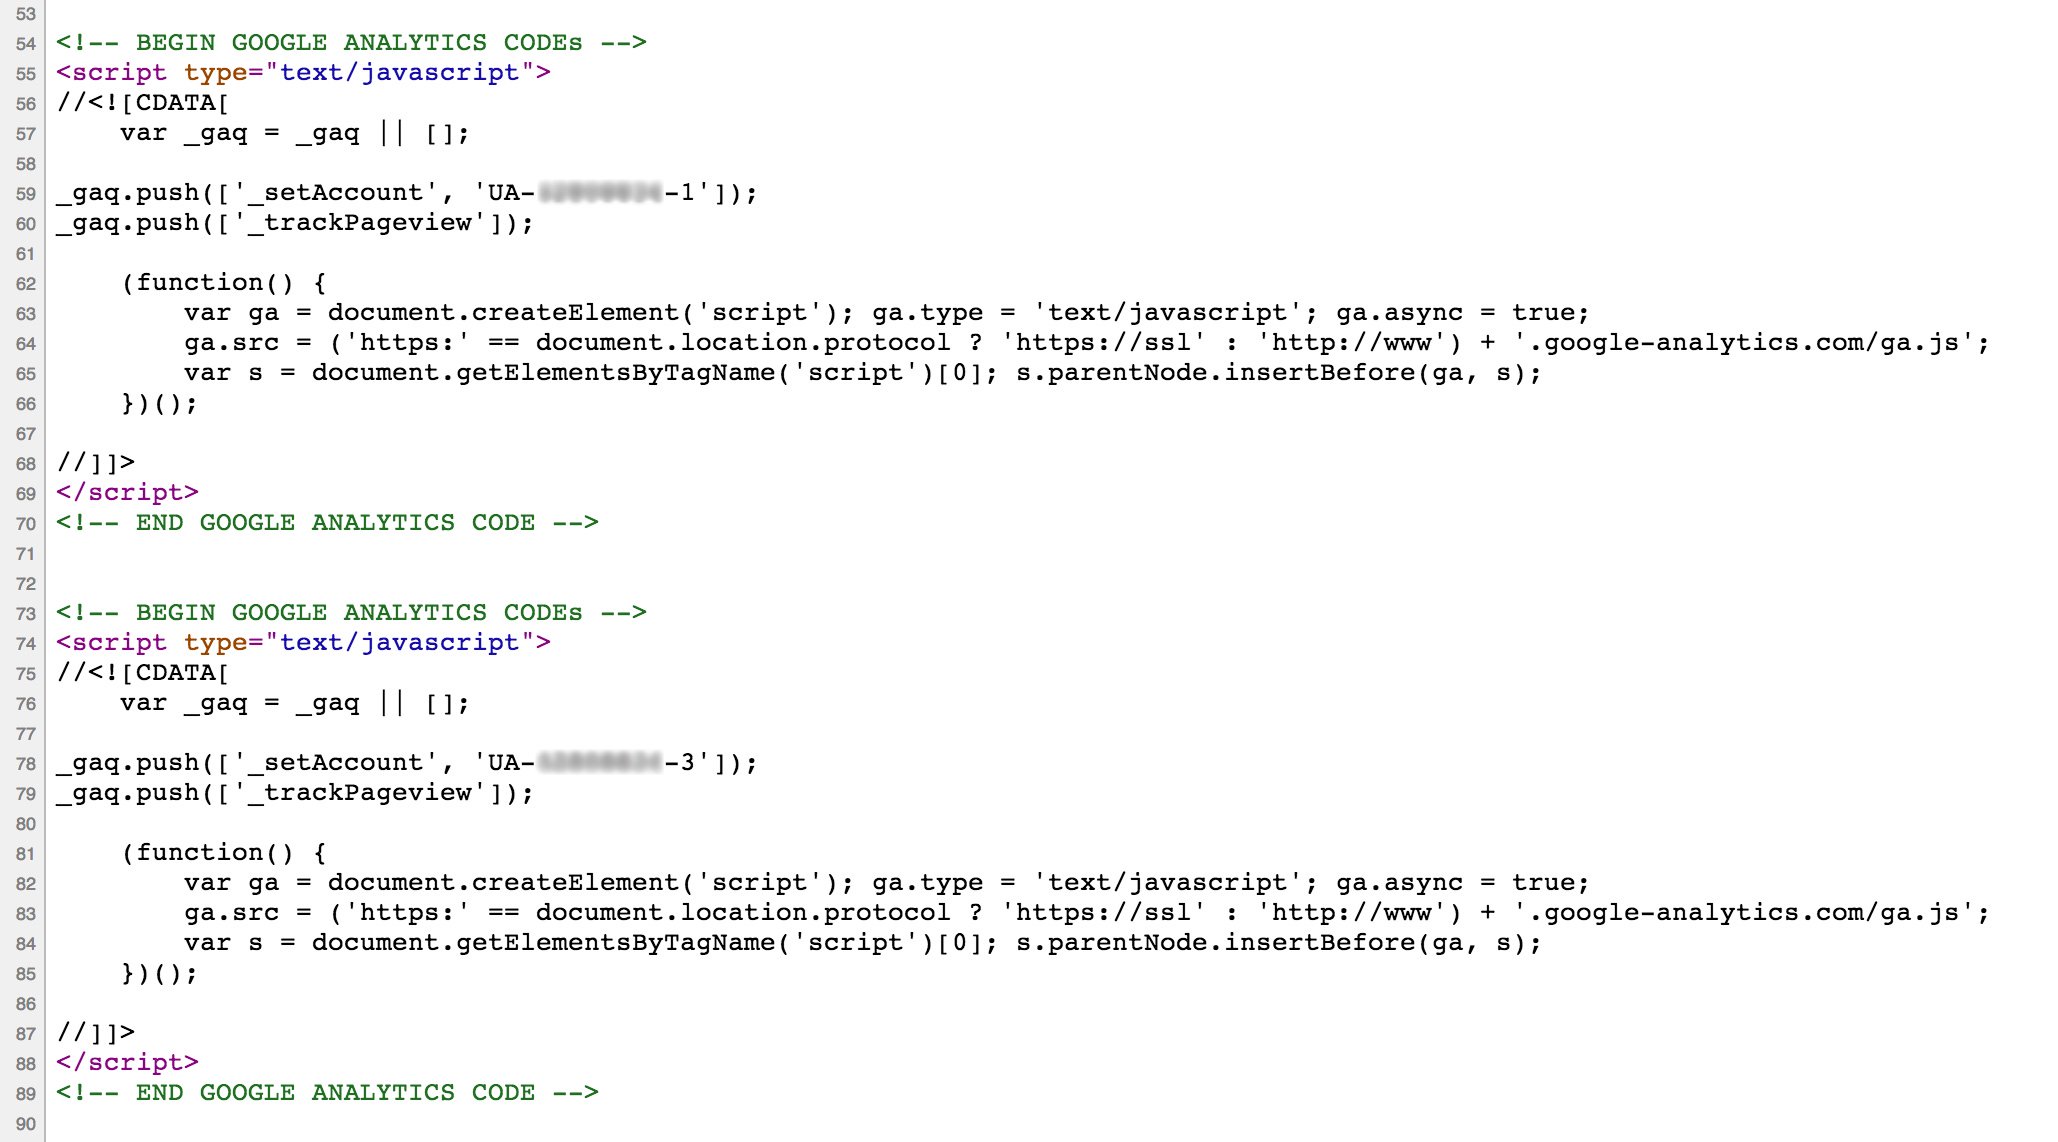 In the head section we can see that we're bring out two versions of the analytics code